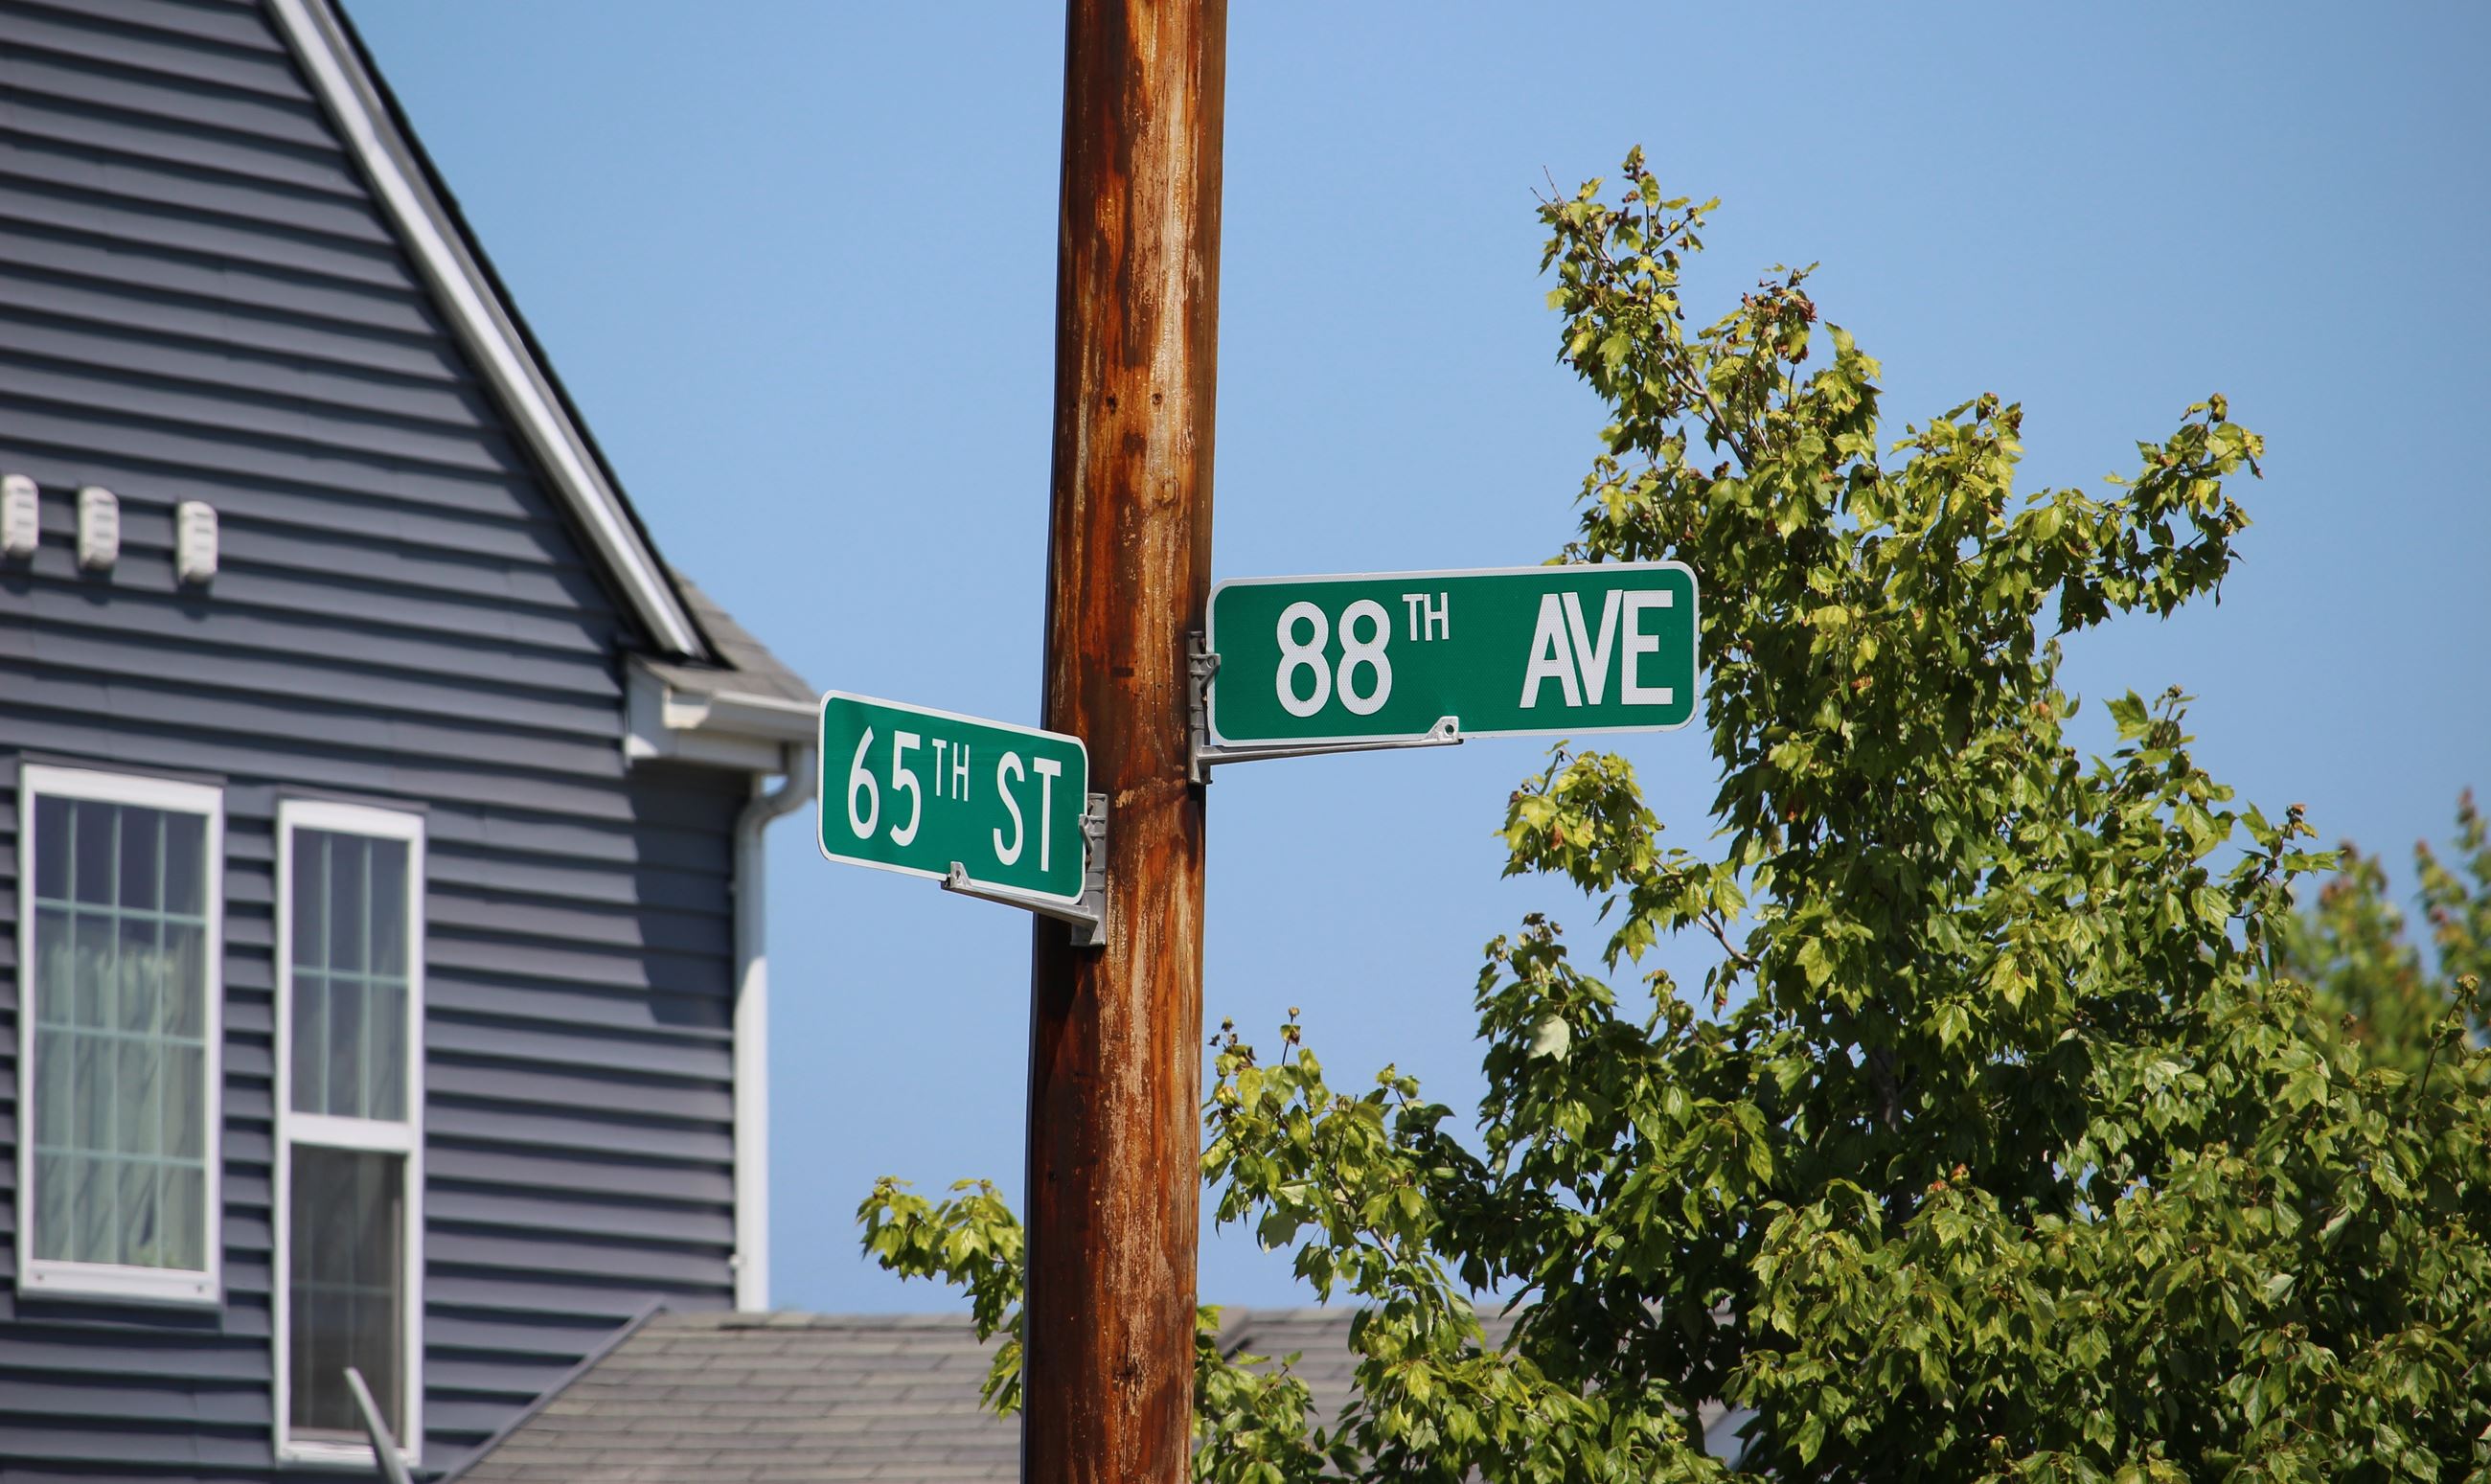 Highway H and 65th Street intersection street signs